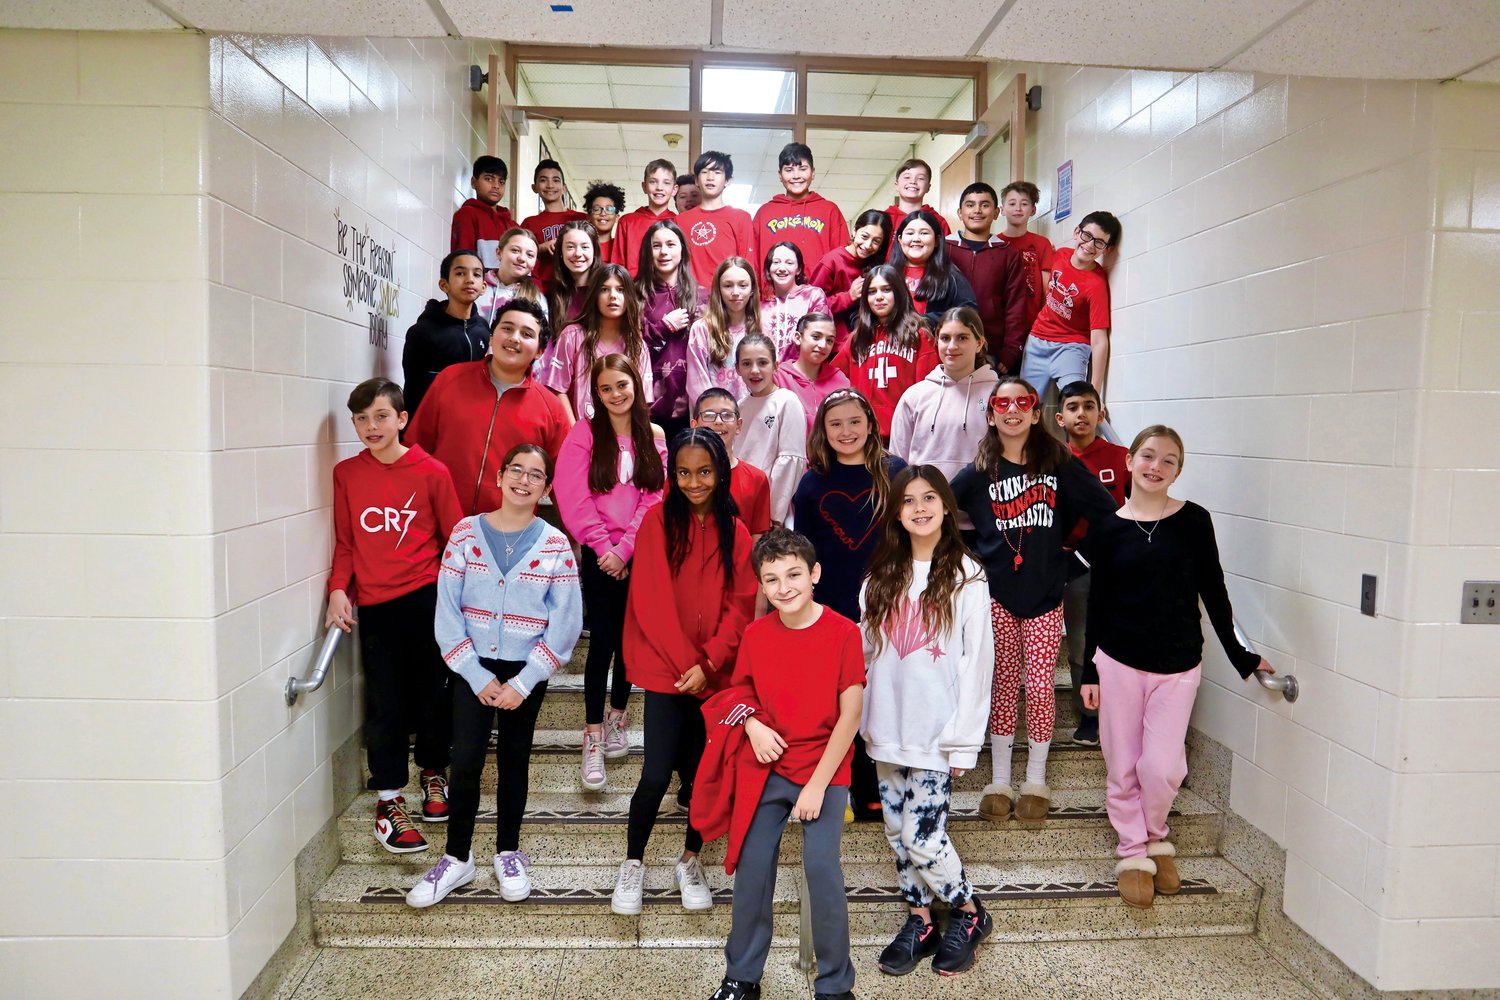 South Middle School also marked Spirit Week during the week of Feb. 13 by wearing different colors each day.